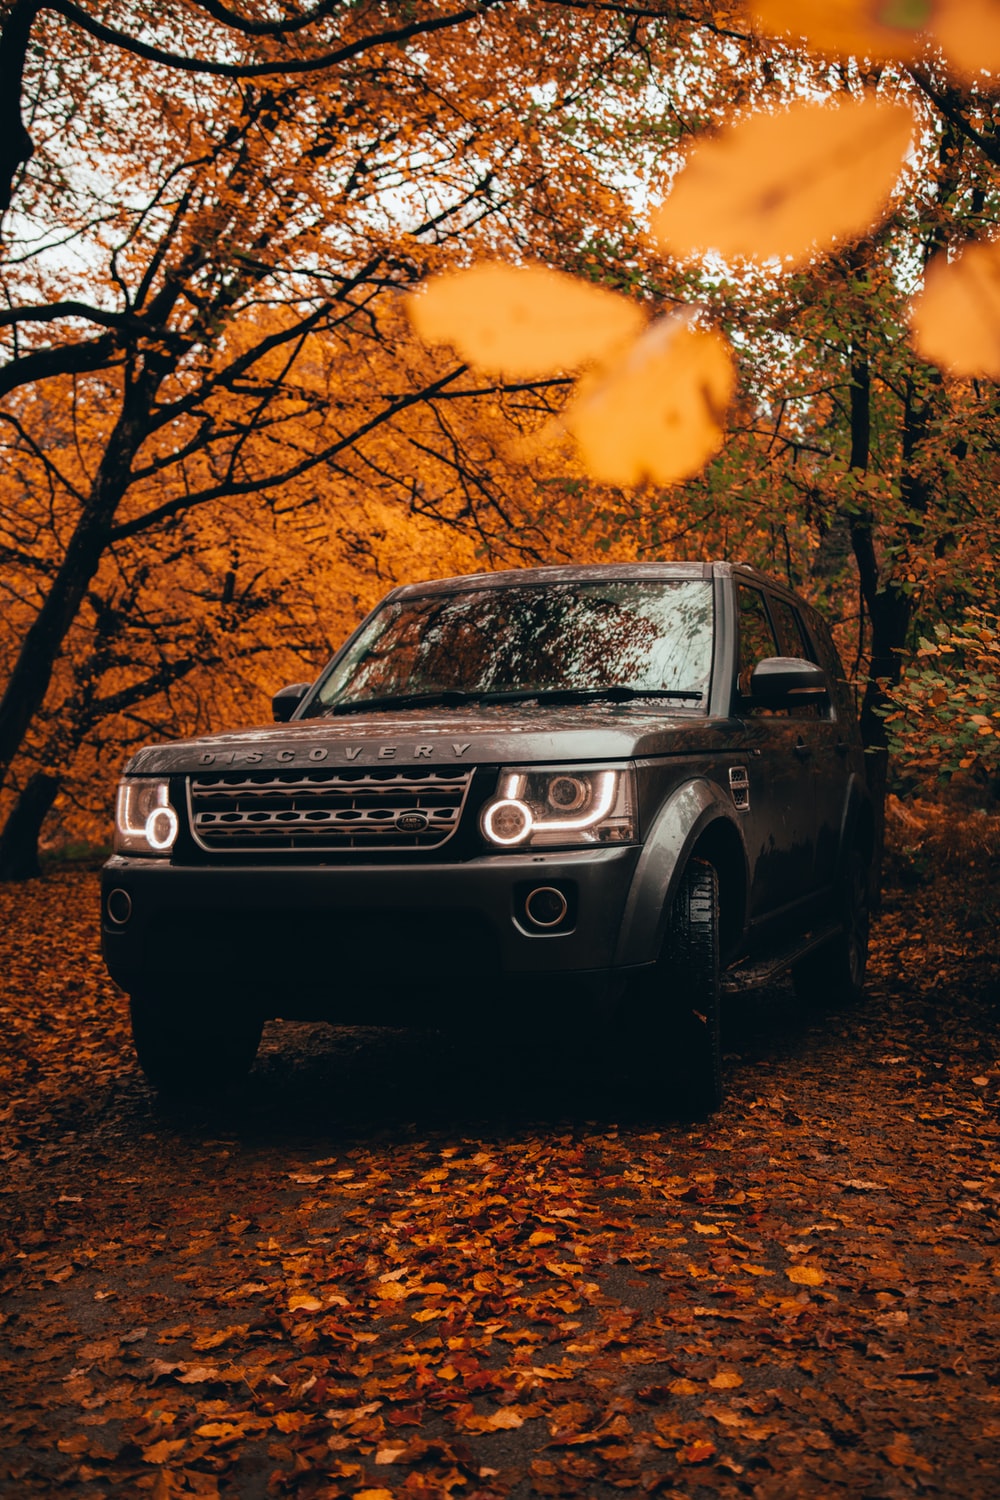 Land Rover Pictures Image